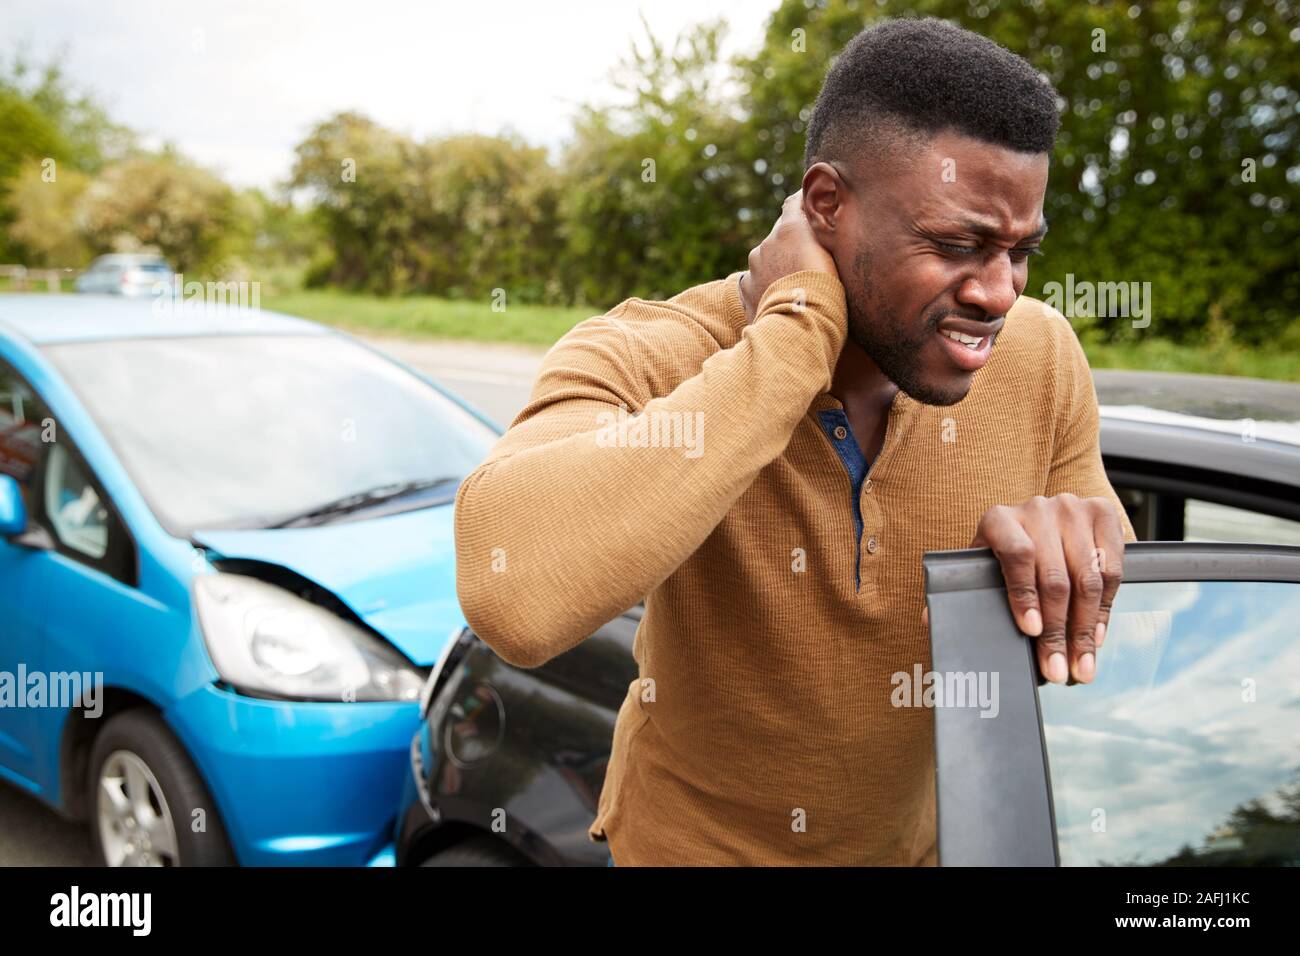 Male Motorist With Whiplash Injury In Car Crash Getting Out Of Vehicle Stock Photo